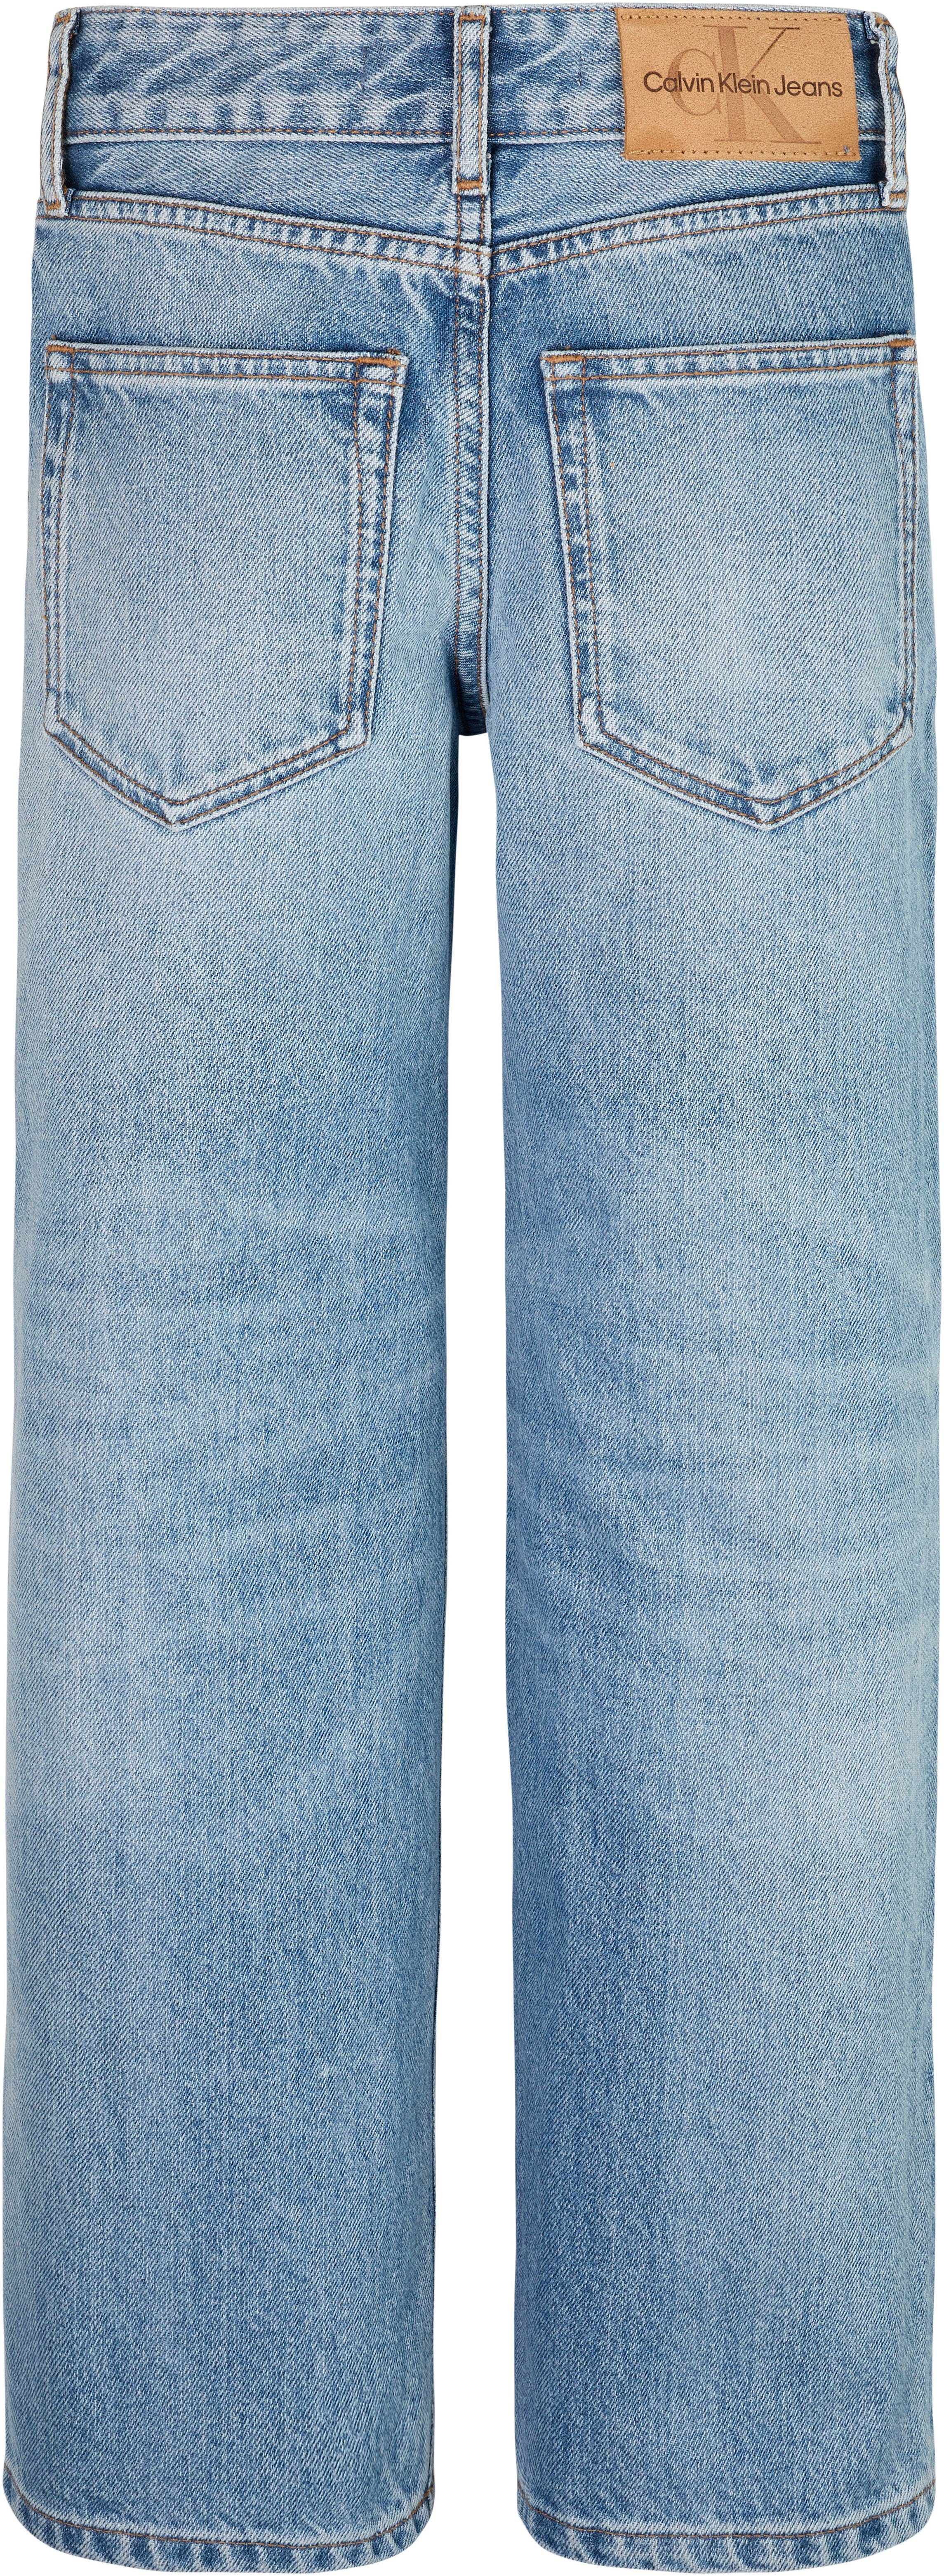 RELAXED Klein Jeans Stretch-Jeans AUTH. Calvin SKATER BLUE LIGHT